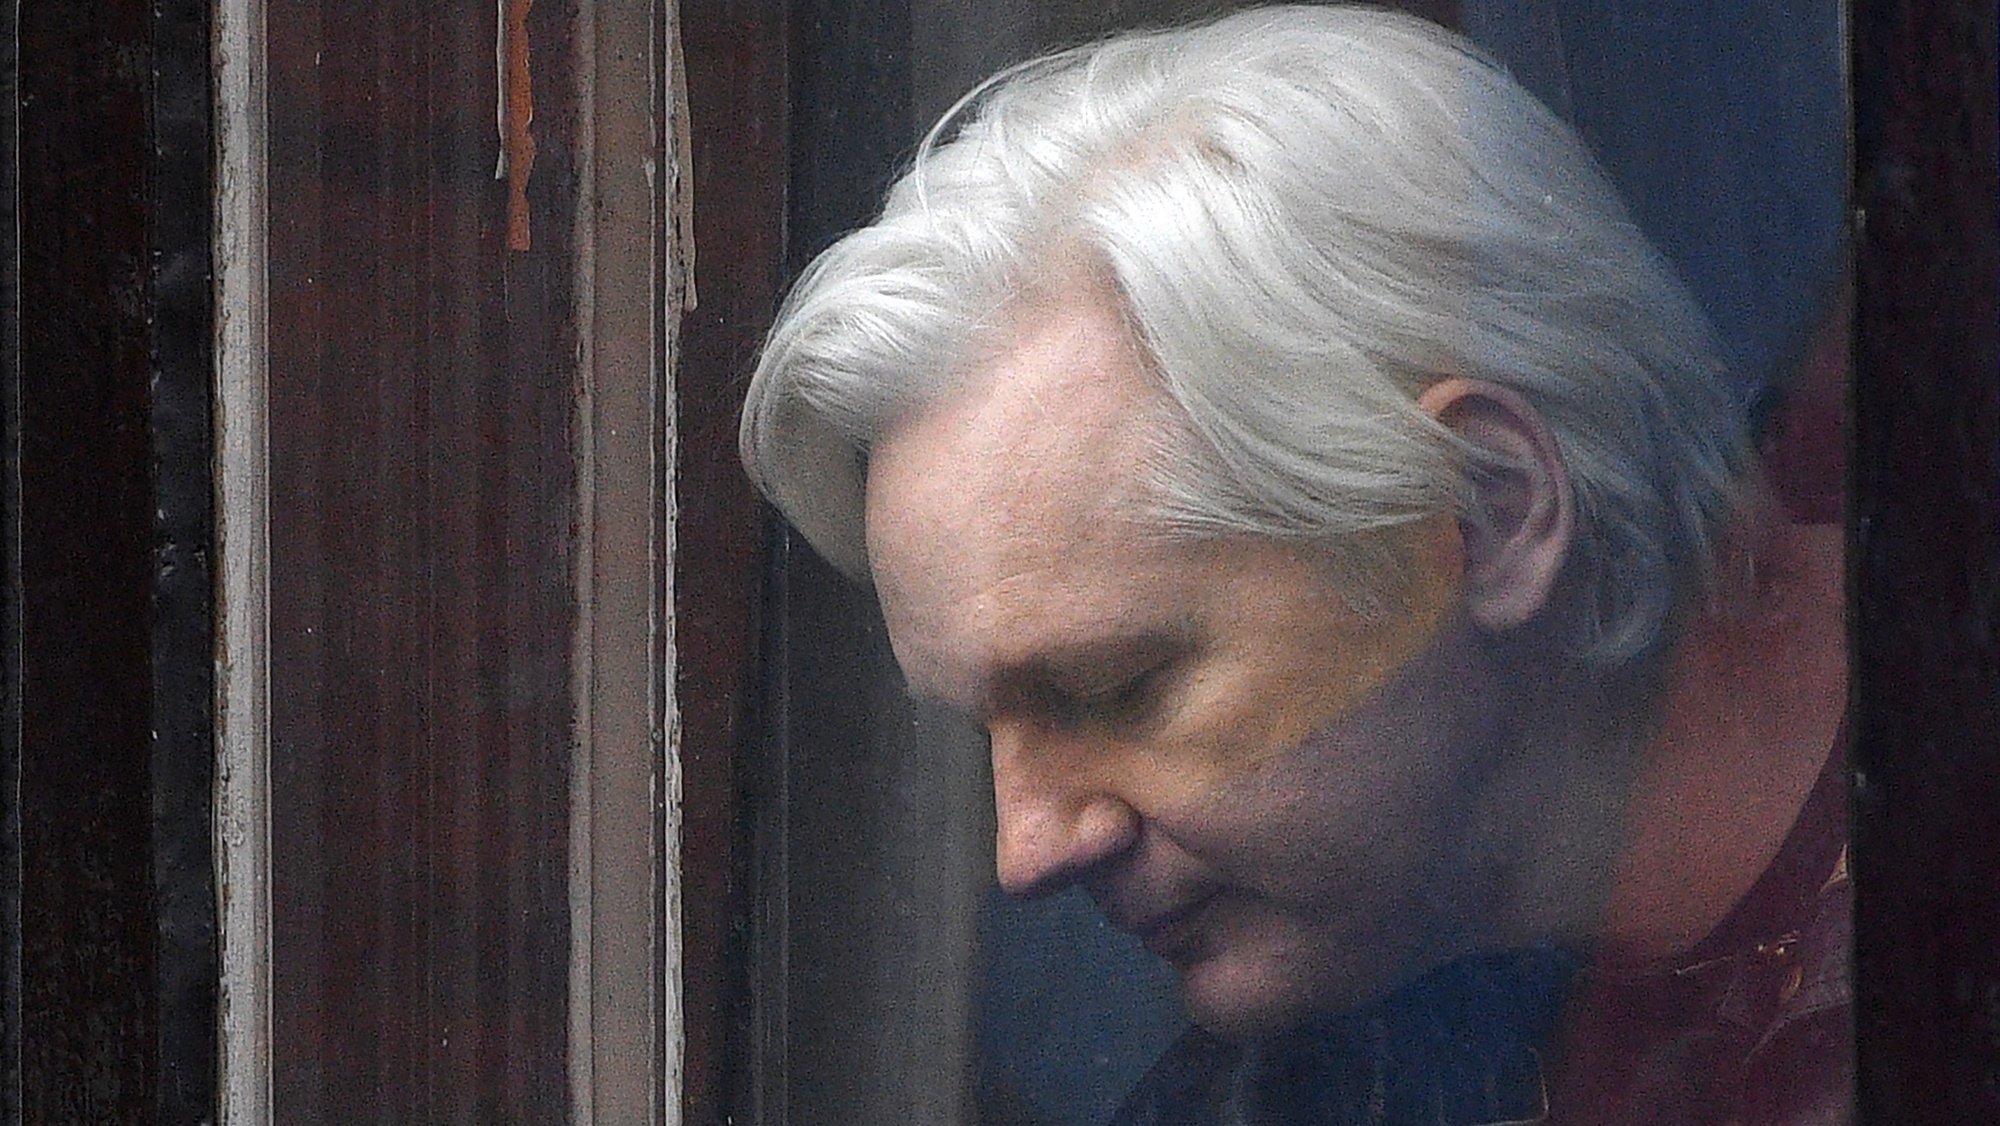 epa10017727 (FILE) - Wikileaks founder Julian Assange speaks to reporters on the balcony of the Ecuadorian Embassy in London, Britain, 19 May 2017 (reissued 17 June 2022). Wikileaks founder Julian Assange’s extradition to the US has been approved by British Home Secretary Priti Patel 17 June 2022.  EPA/FACUNDO ARRIZABALAGA *** Local Caption *** 55897098